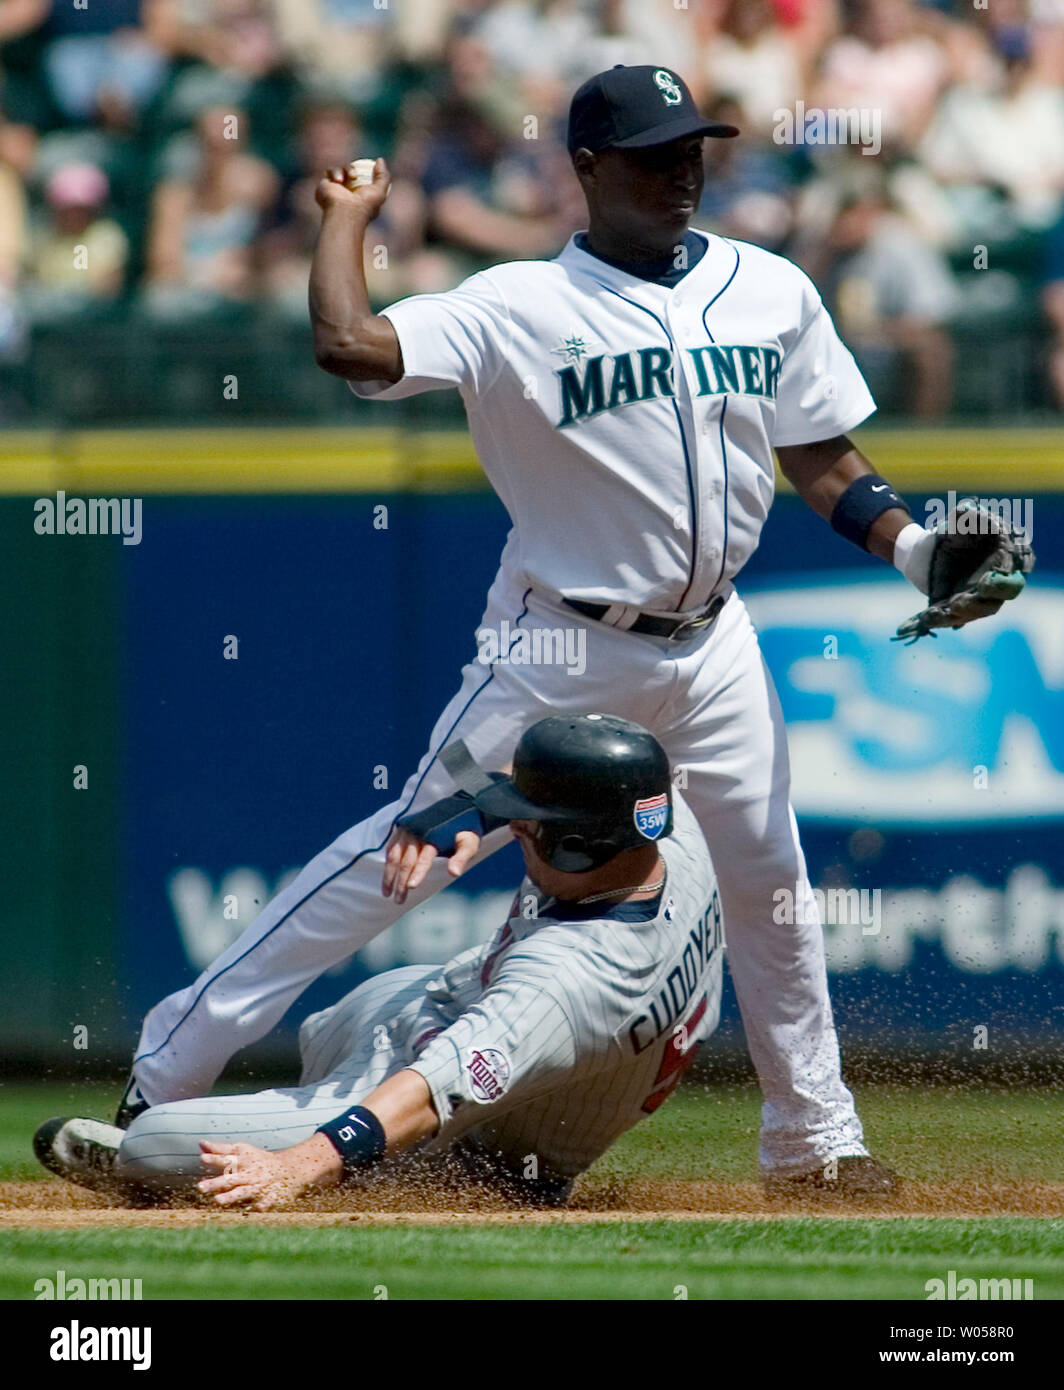 Seattle Mariners' Adrian Beltre watches his line drive caught by Texas  Rangers second baseman Ian Kinsler in the third inning at Safeco Field in  Seattle April 5, 2008. The Mariners beat the